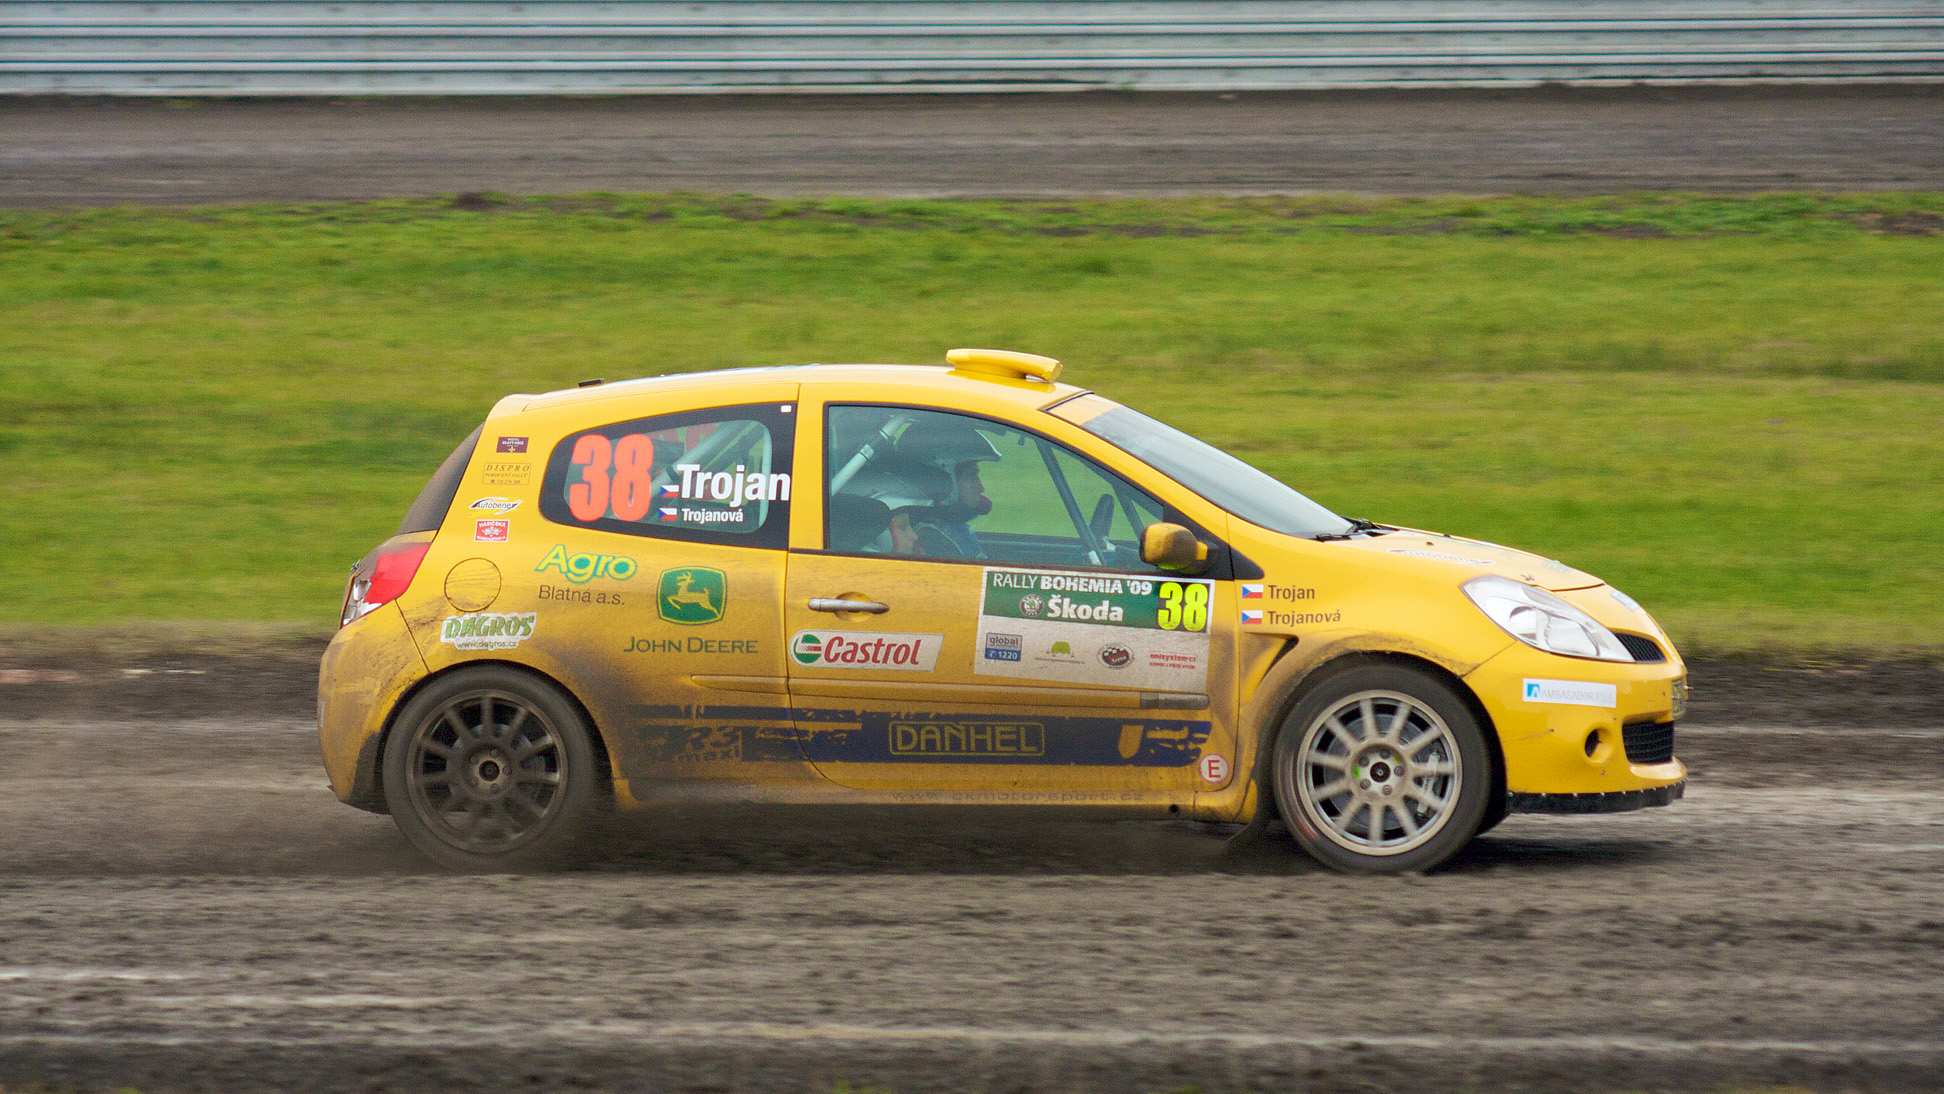 a small yellow race car driving through a dirt track